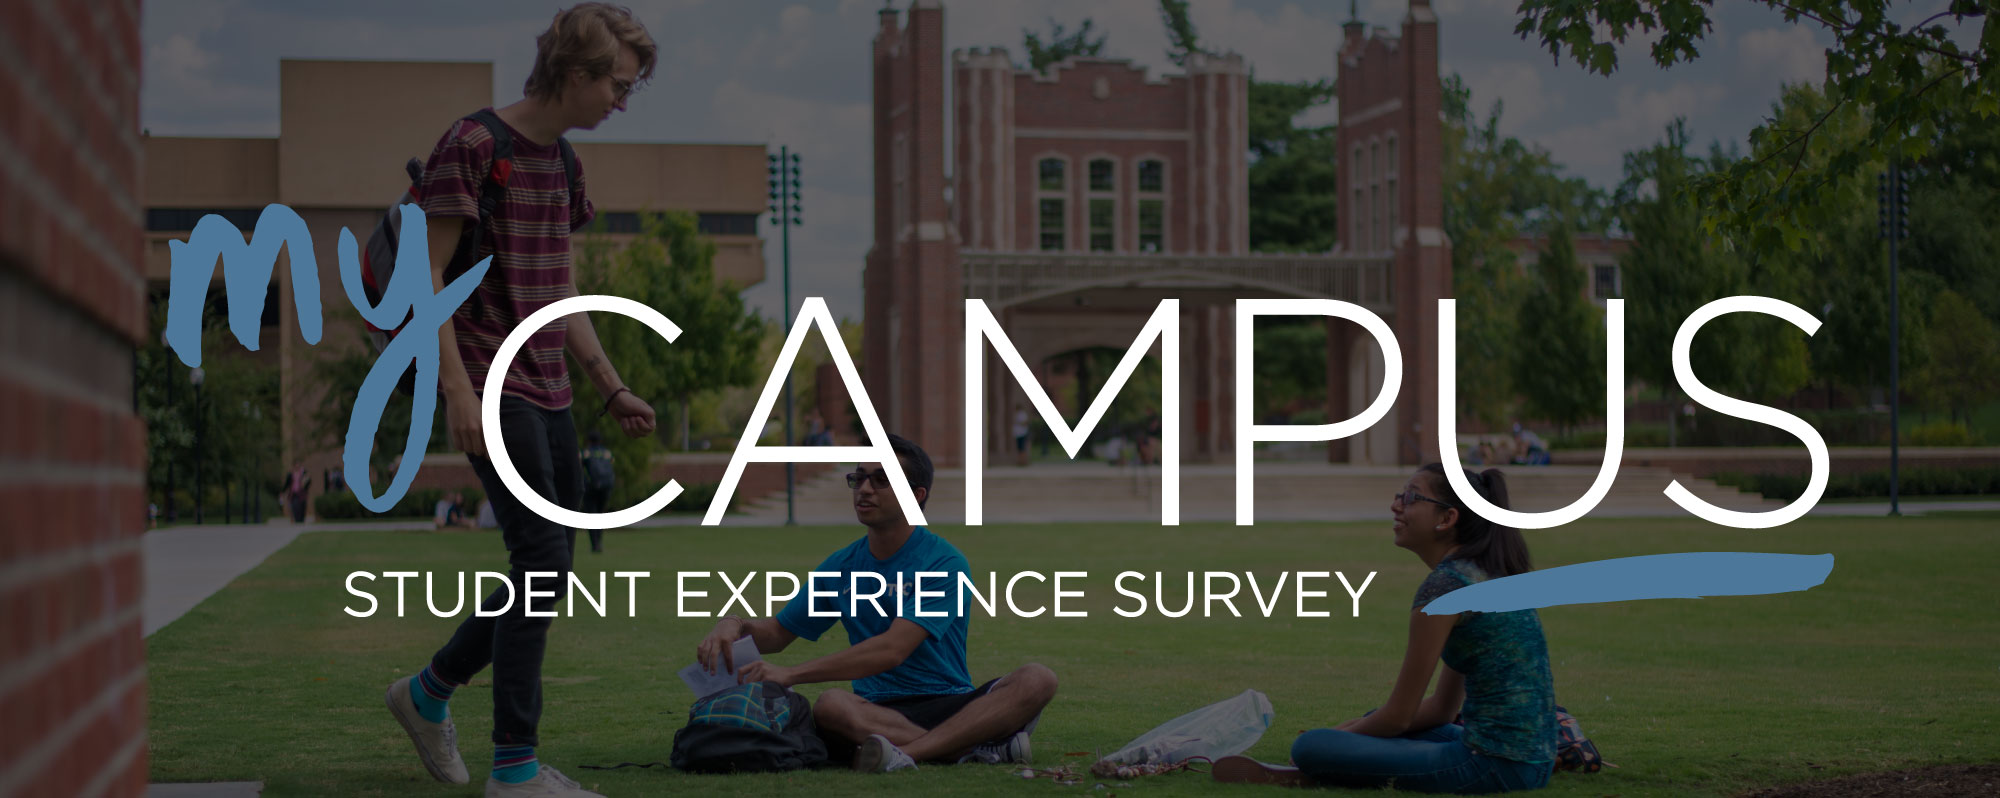 My Campus Student Experience Survey